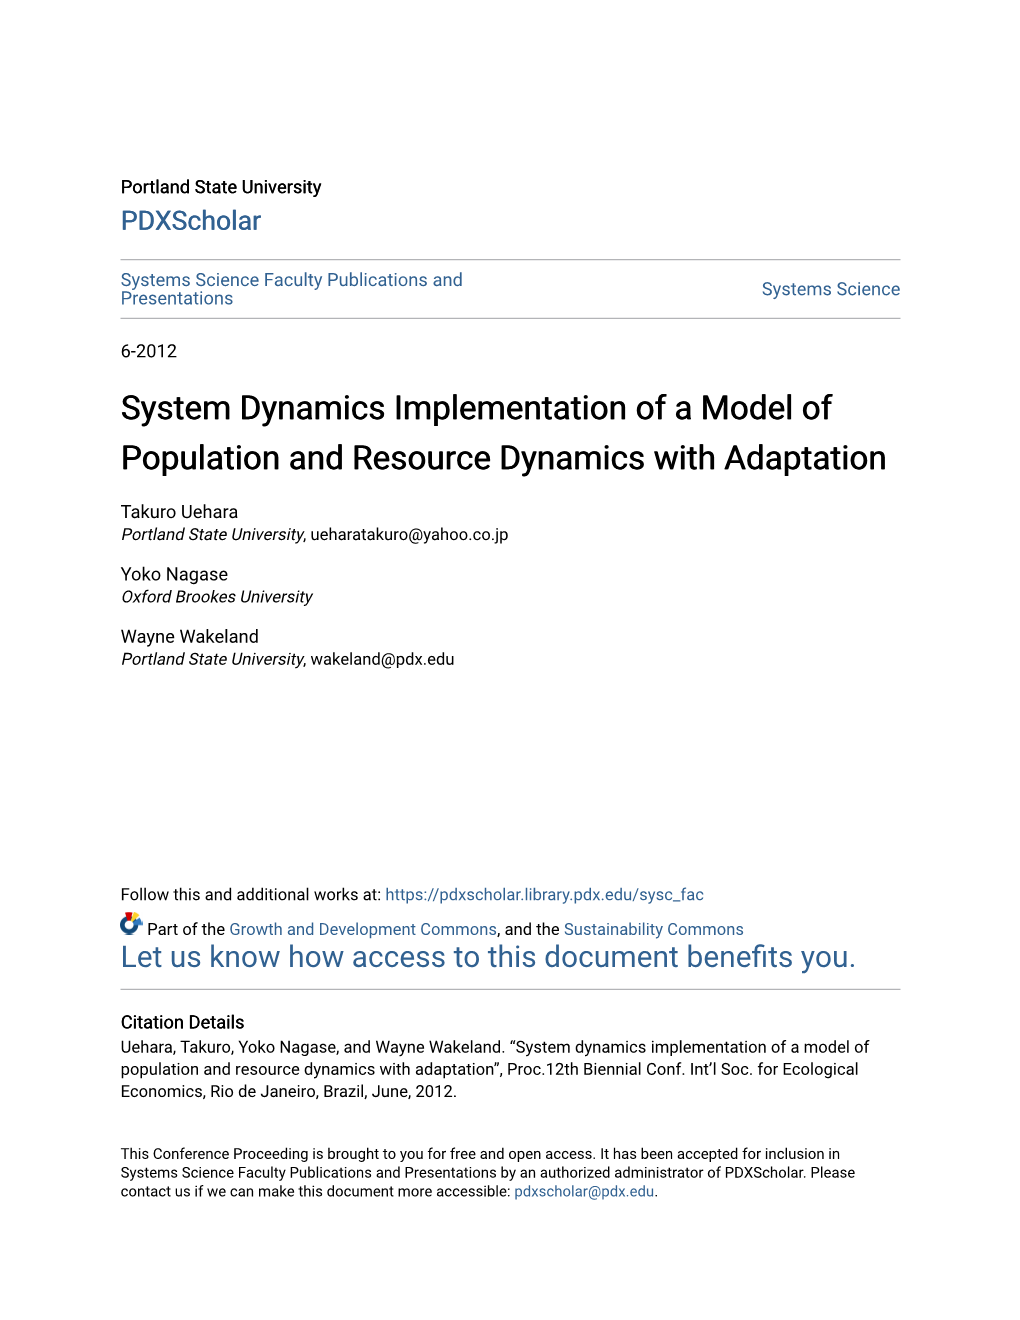 System Dynamics Implementation of a Model of Population and Resource Dynamics with Adaptation